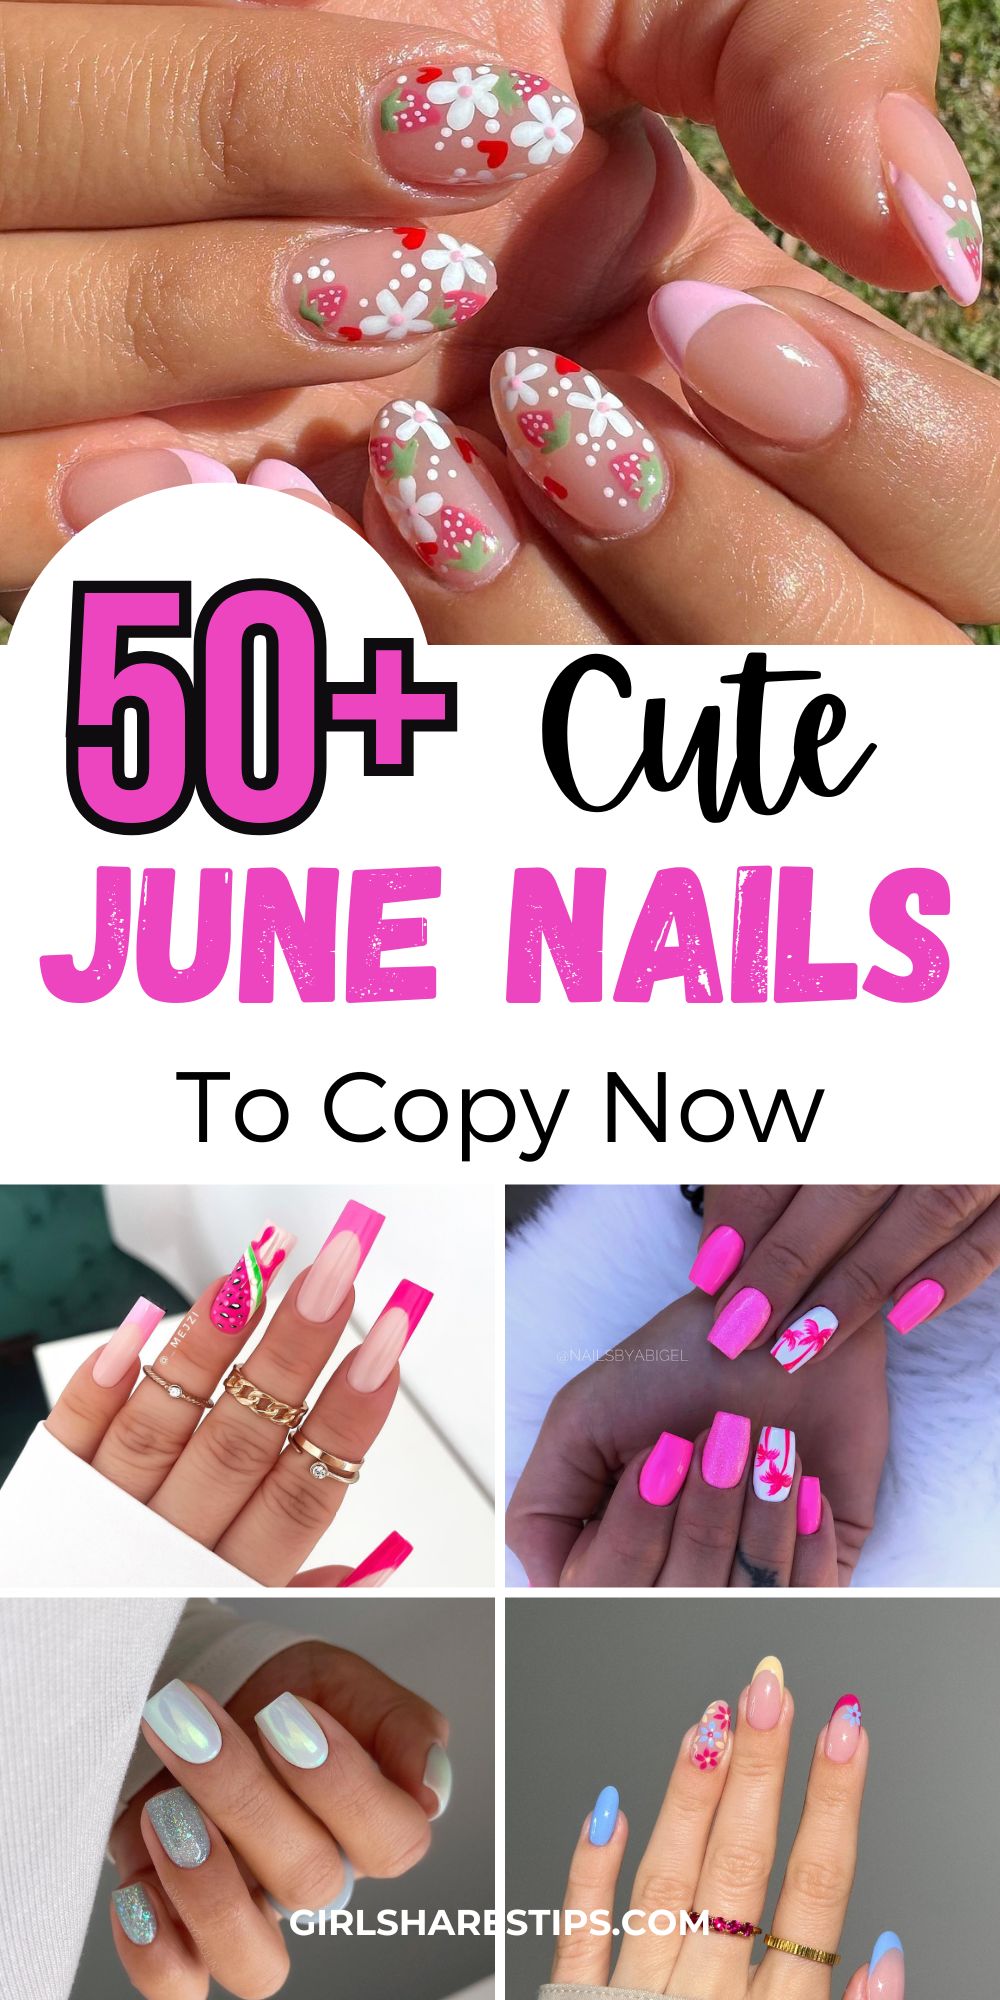 June nails collage